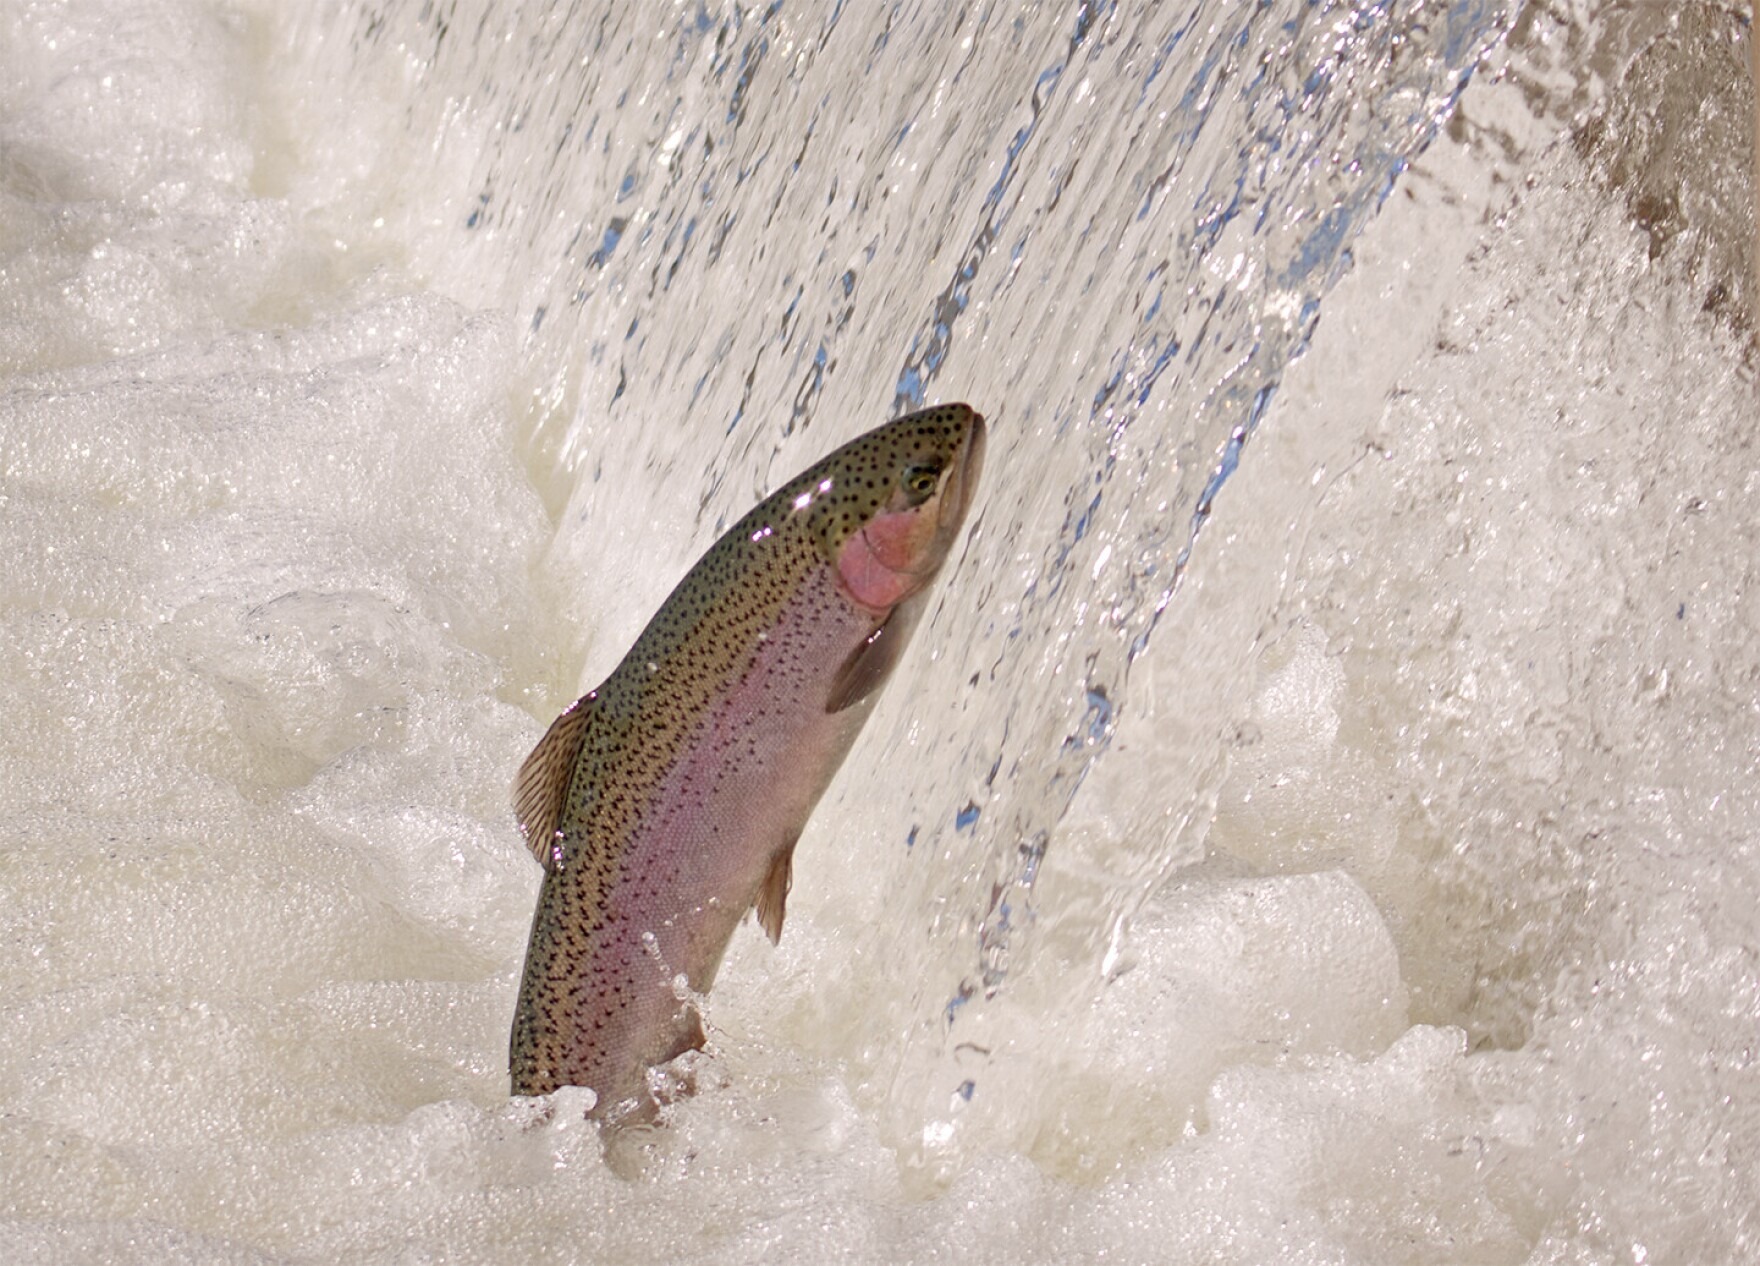 The U.S. Army Corps of Engineers is investigating numerous steelhead deaths on the North Fork of the Clearwater River in Idaho. Pictured here, an adult steelhead jumps in a holding pond at the Coleman National Fish Hatchery.